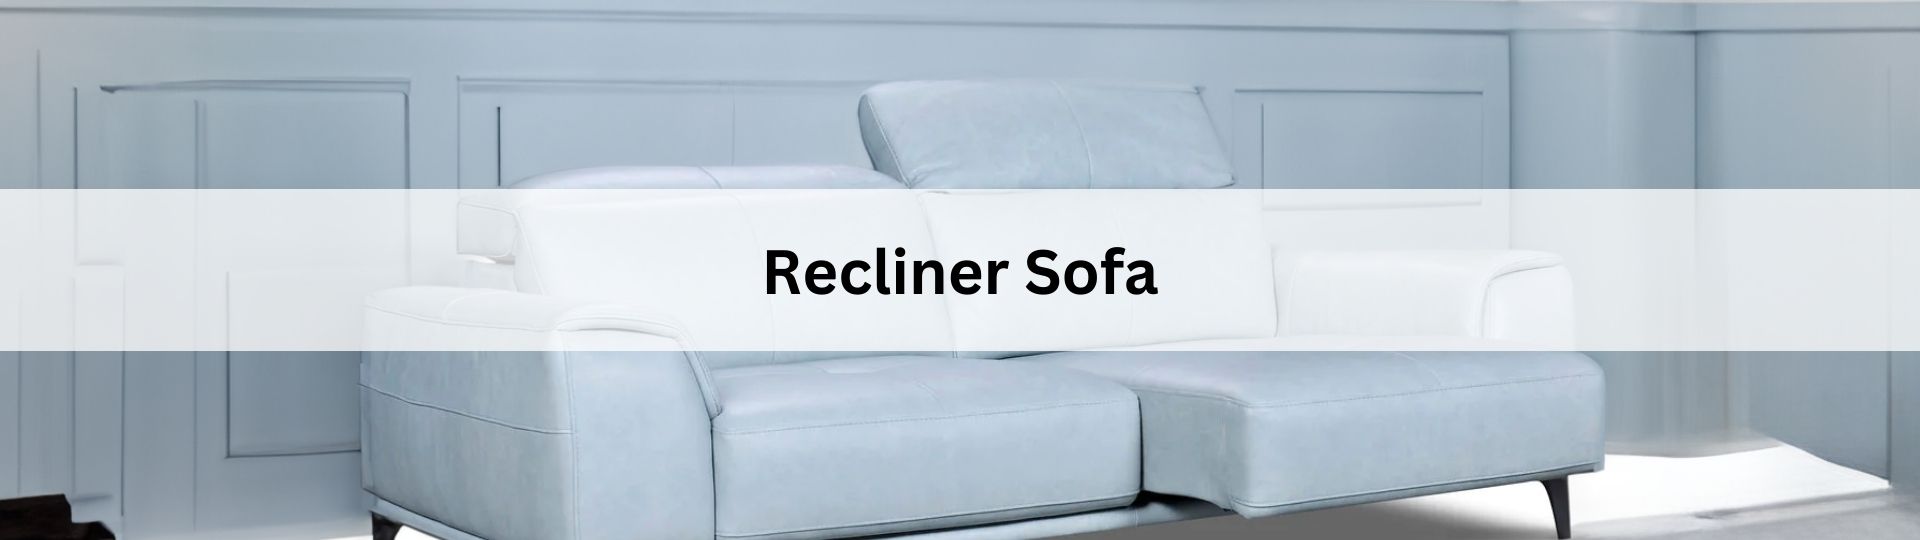 RECLINER SOFA COLLECTION